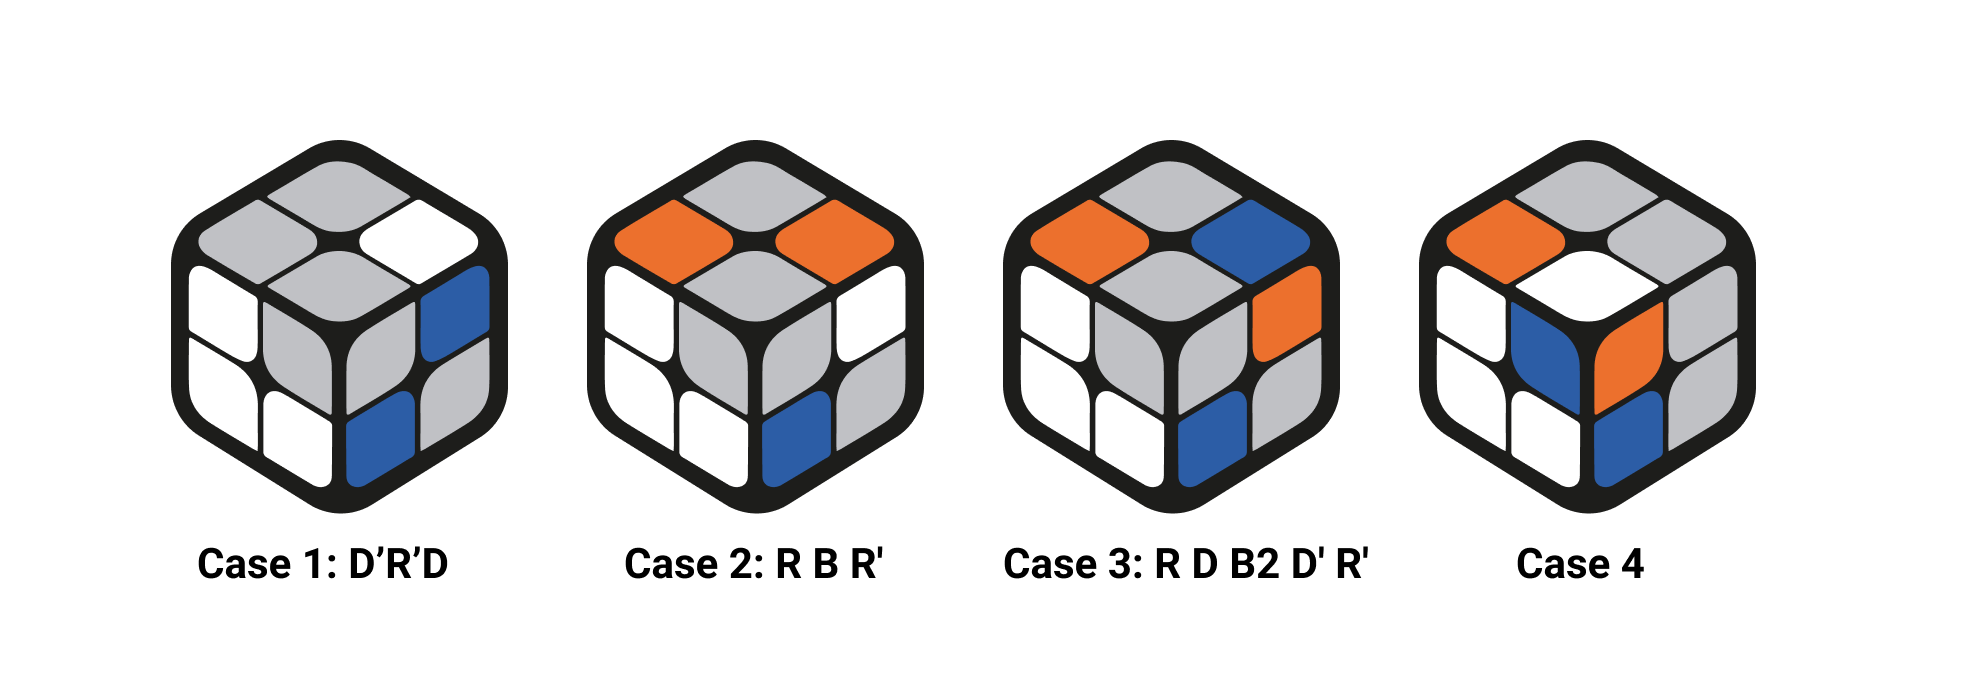 How to Solve a 2x2 Rubik's Cube: Tricks and Speed Algorithms